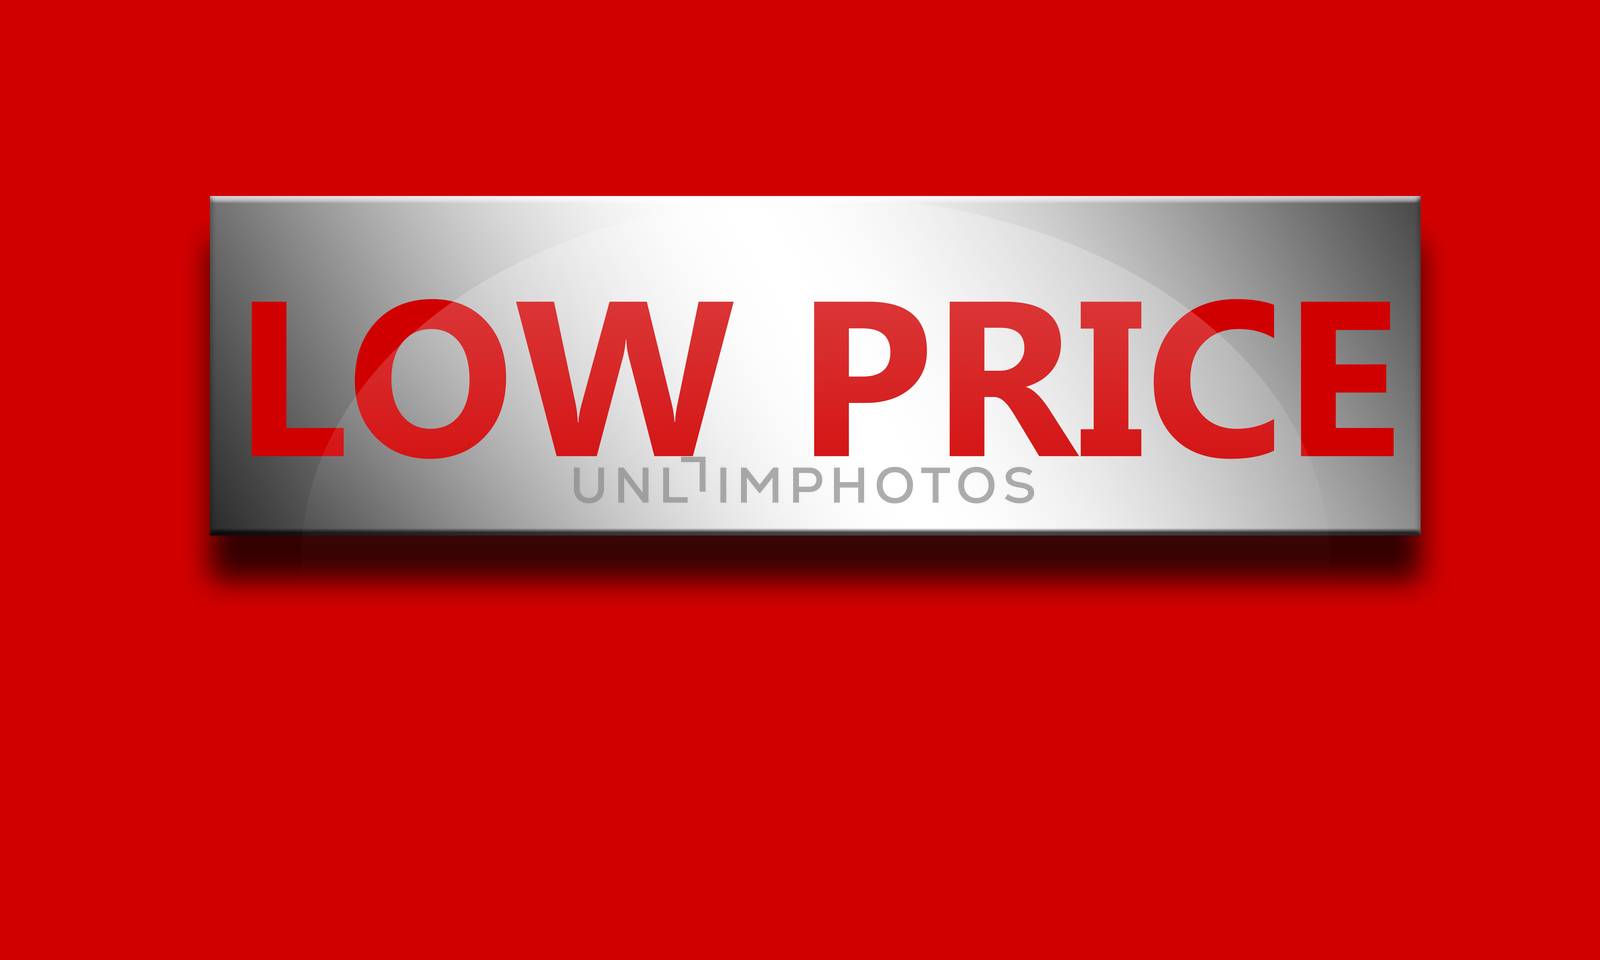 Low price banner design with red background by tang90246